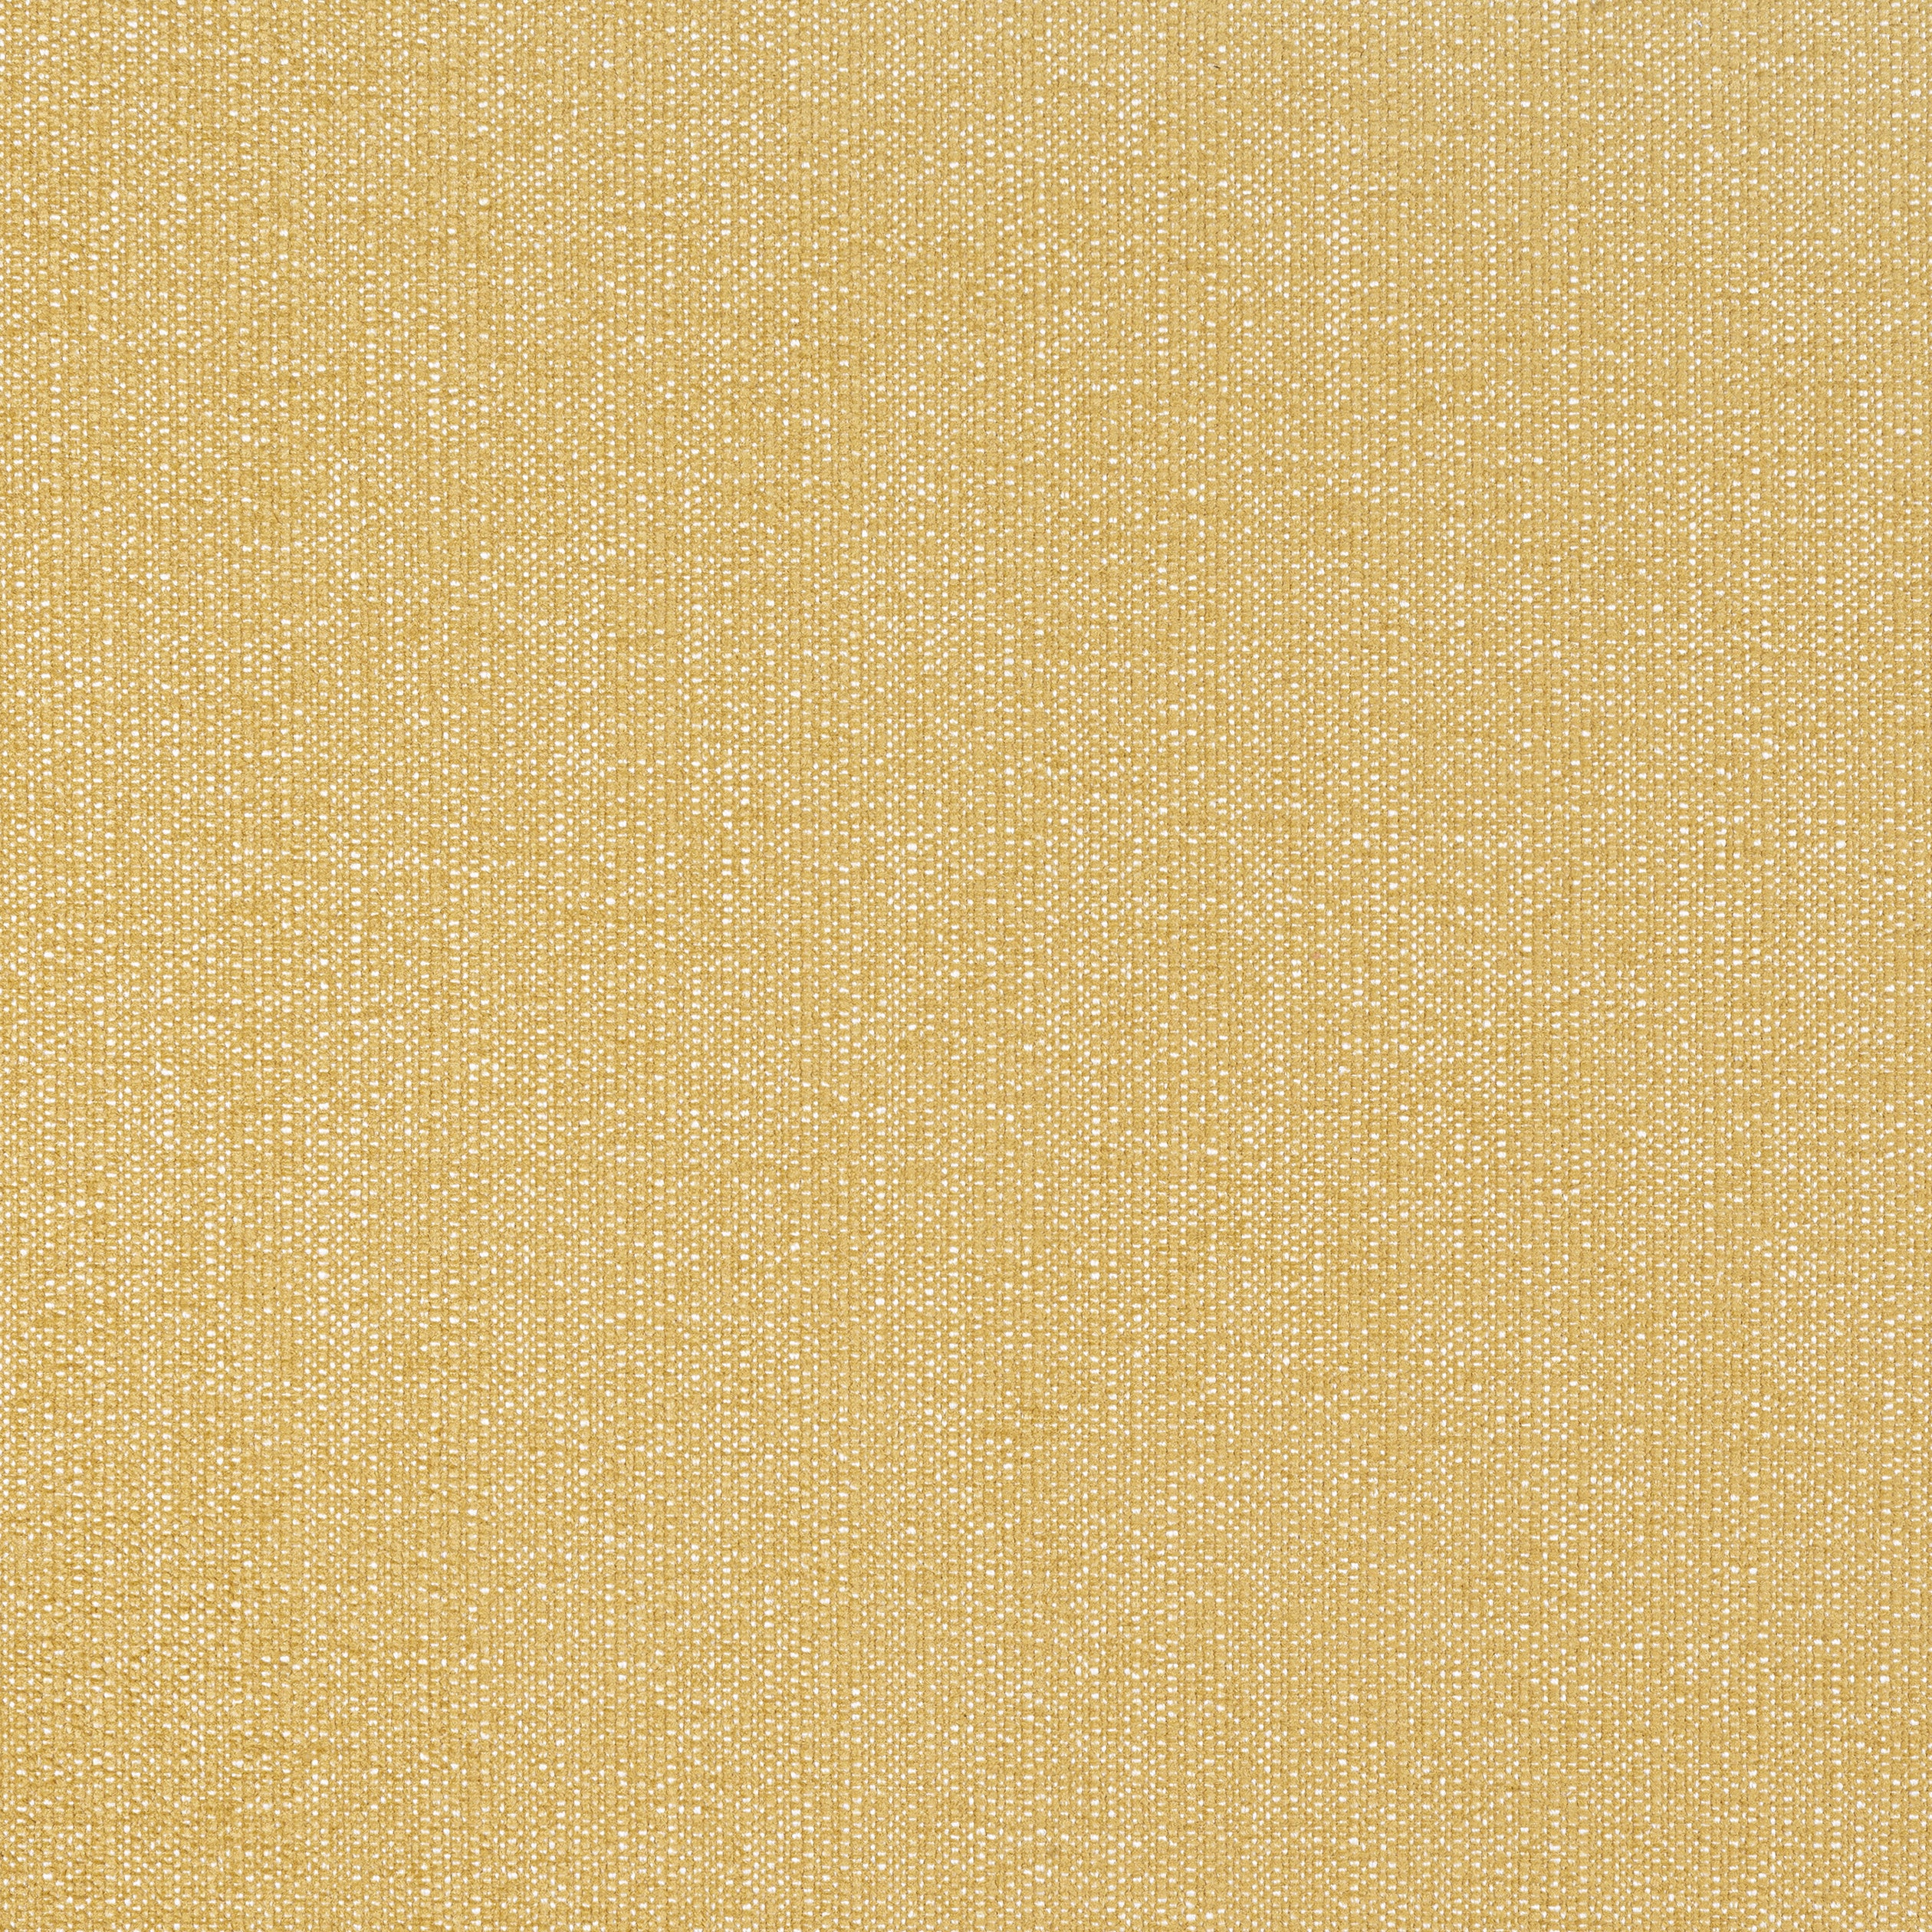 Veda fabric in straw color - pattern number W8715 - by Thibaut in the Haven Textures collection